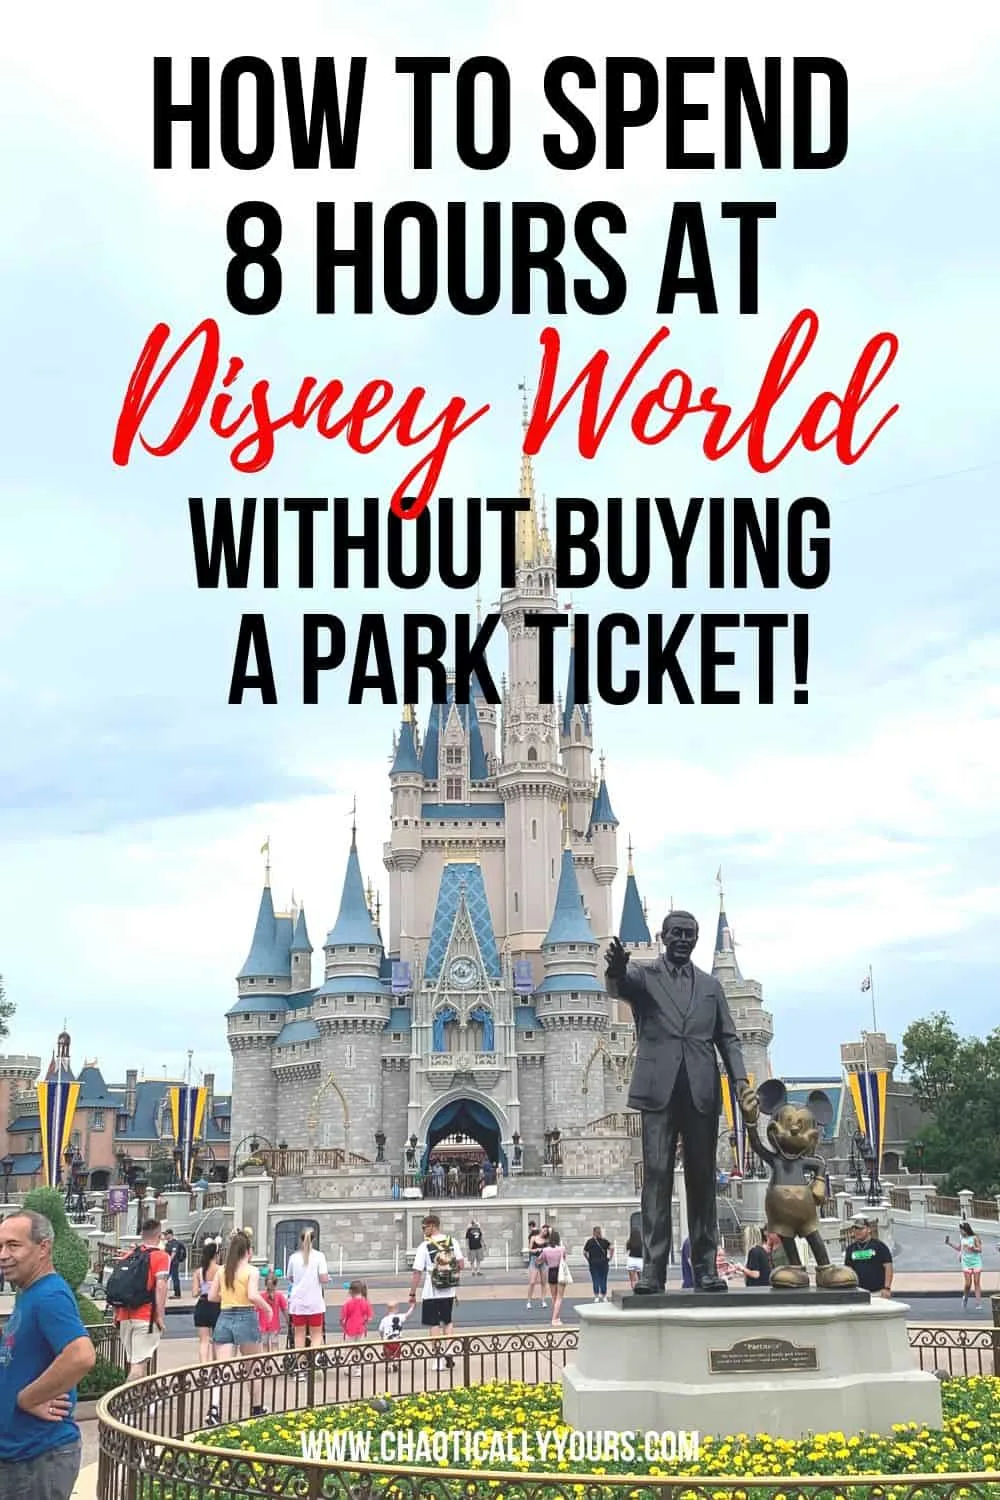 How YOU can spend 8 hours at Walt Disney World without buying a park ticket!